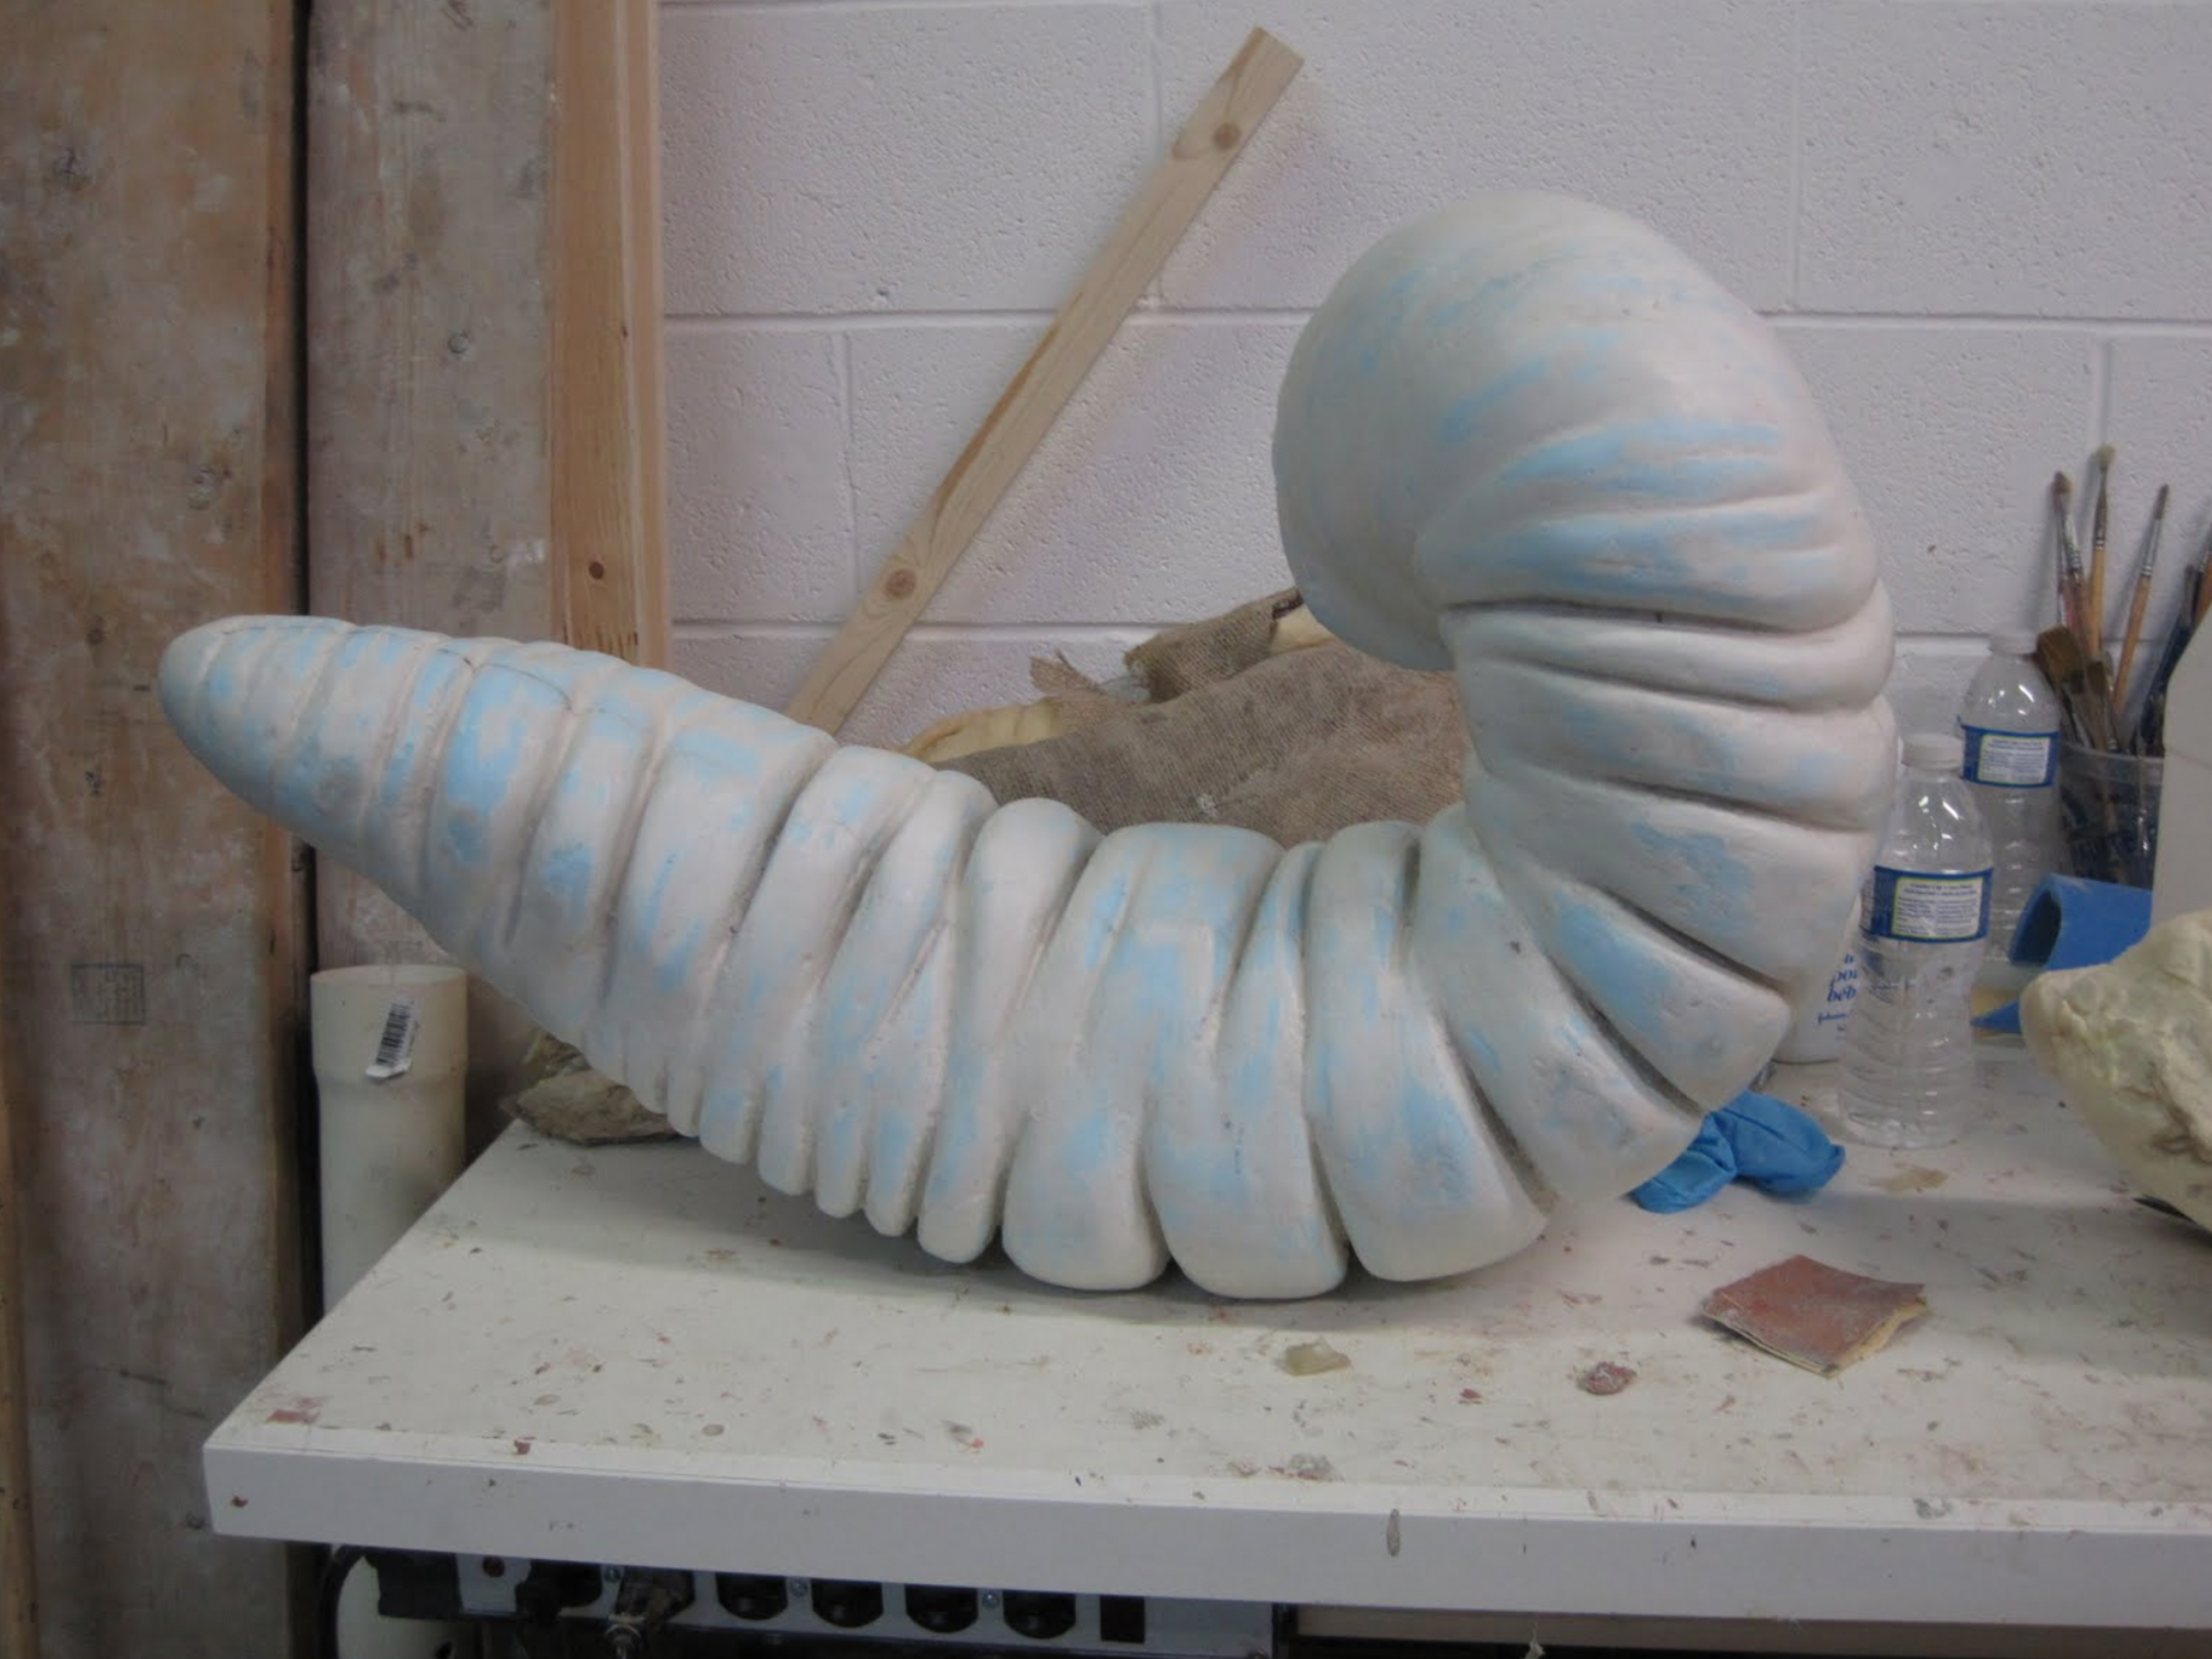 This picture shows a portion of the equine colon that has been re-sculpted in order to make some modifications to the shape. These changes will allow the inflated shape to react in a realistic manner.